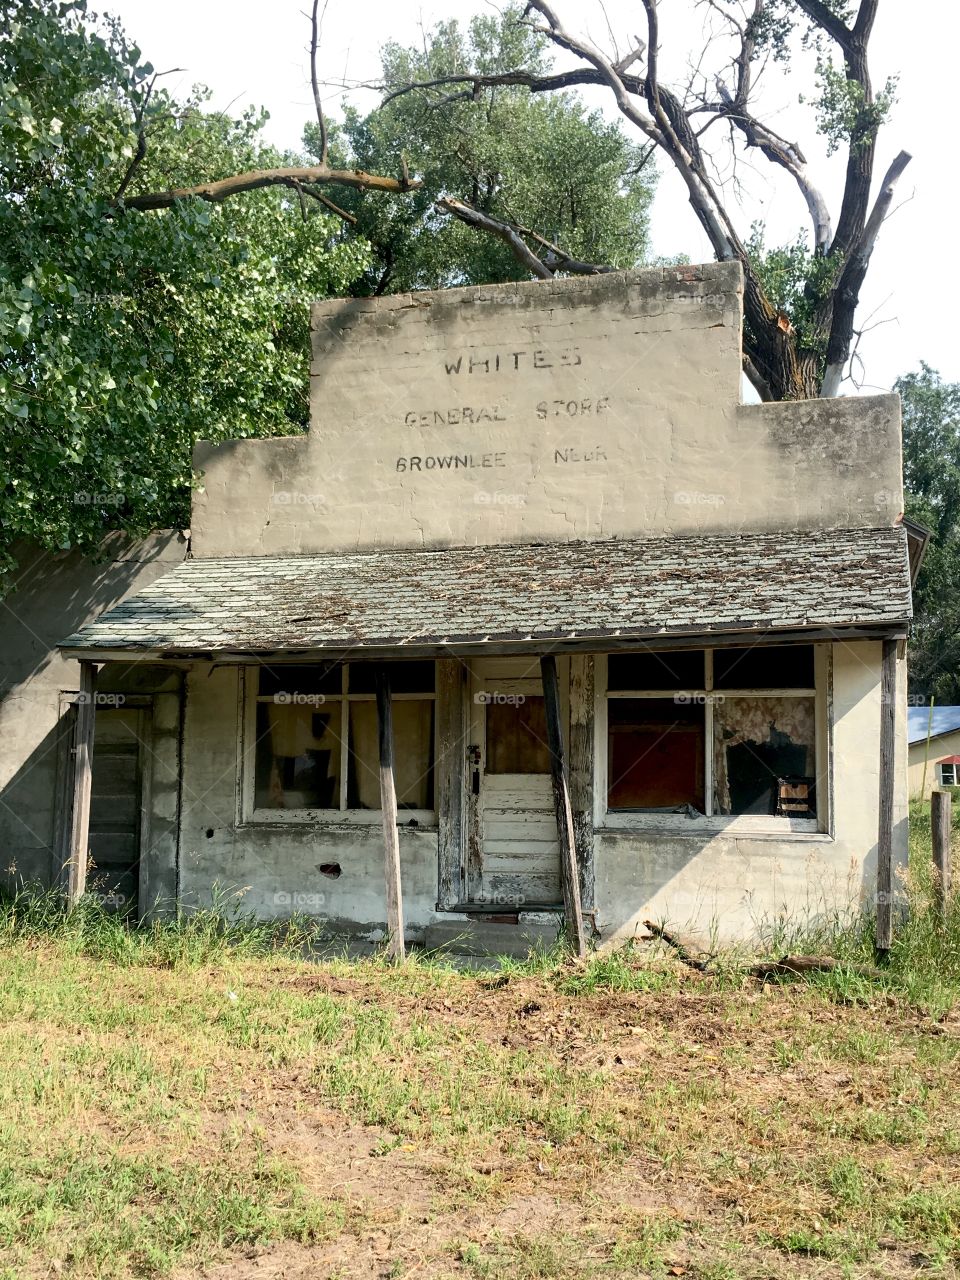 Old abandoned stucco building with a false front storefront and faded lettering